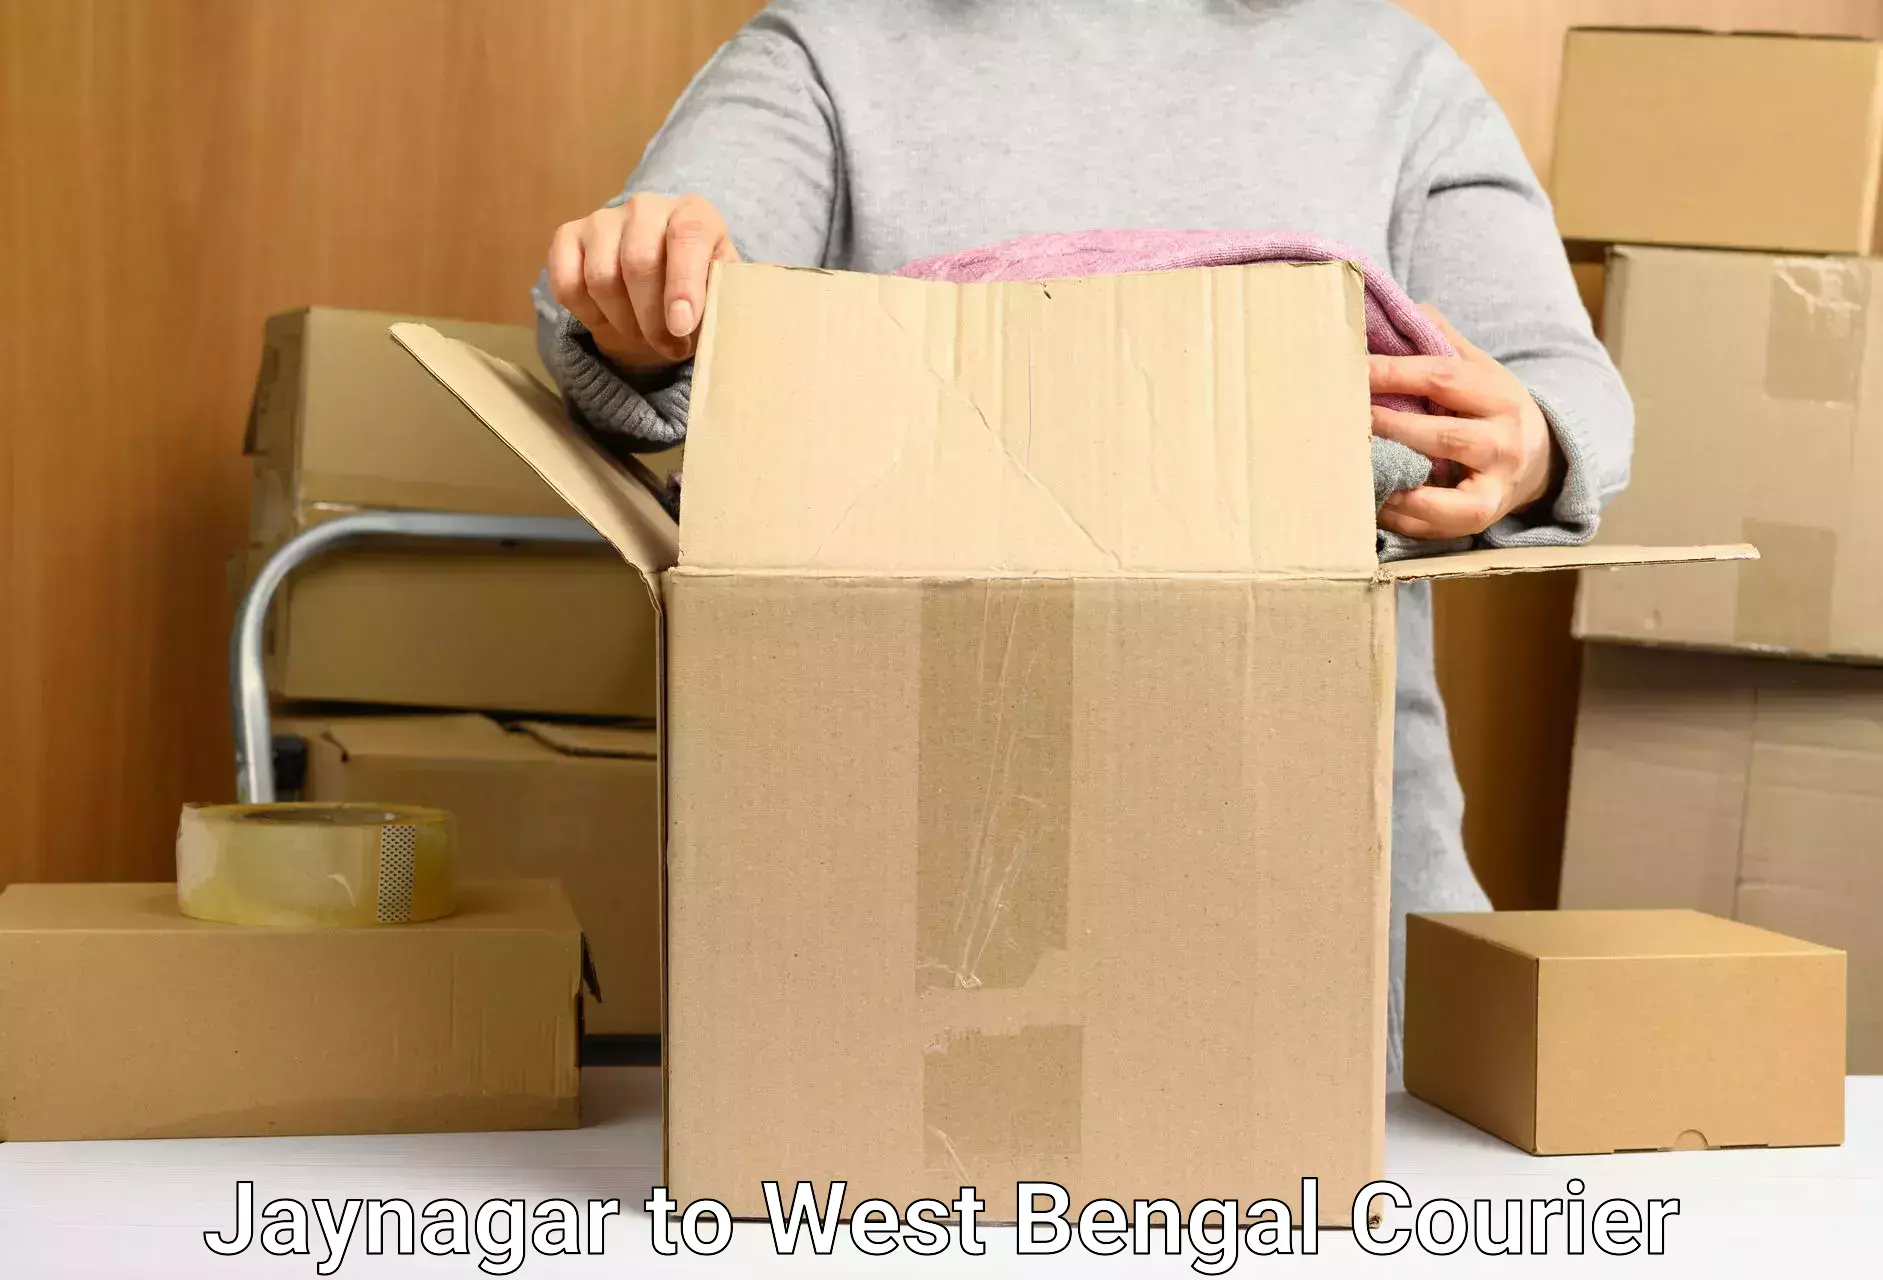 Full-service courier options Jaynagar to West Bengal